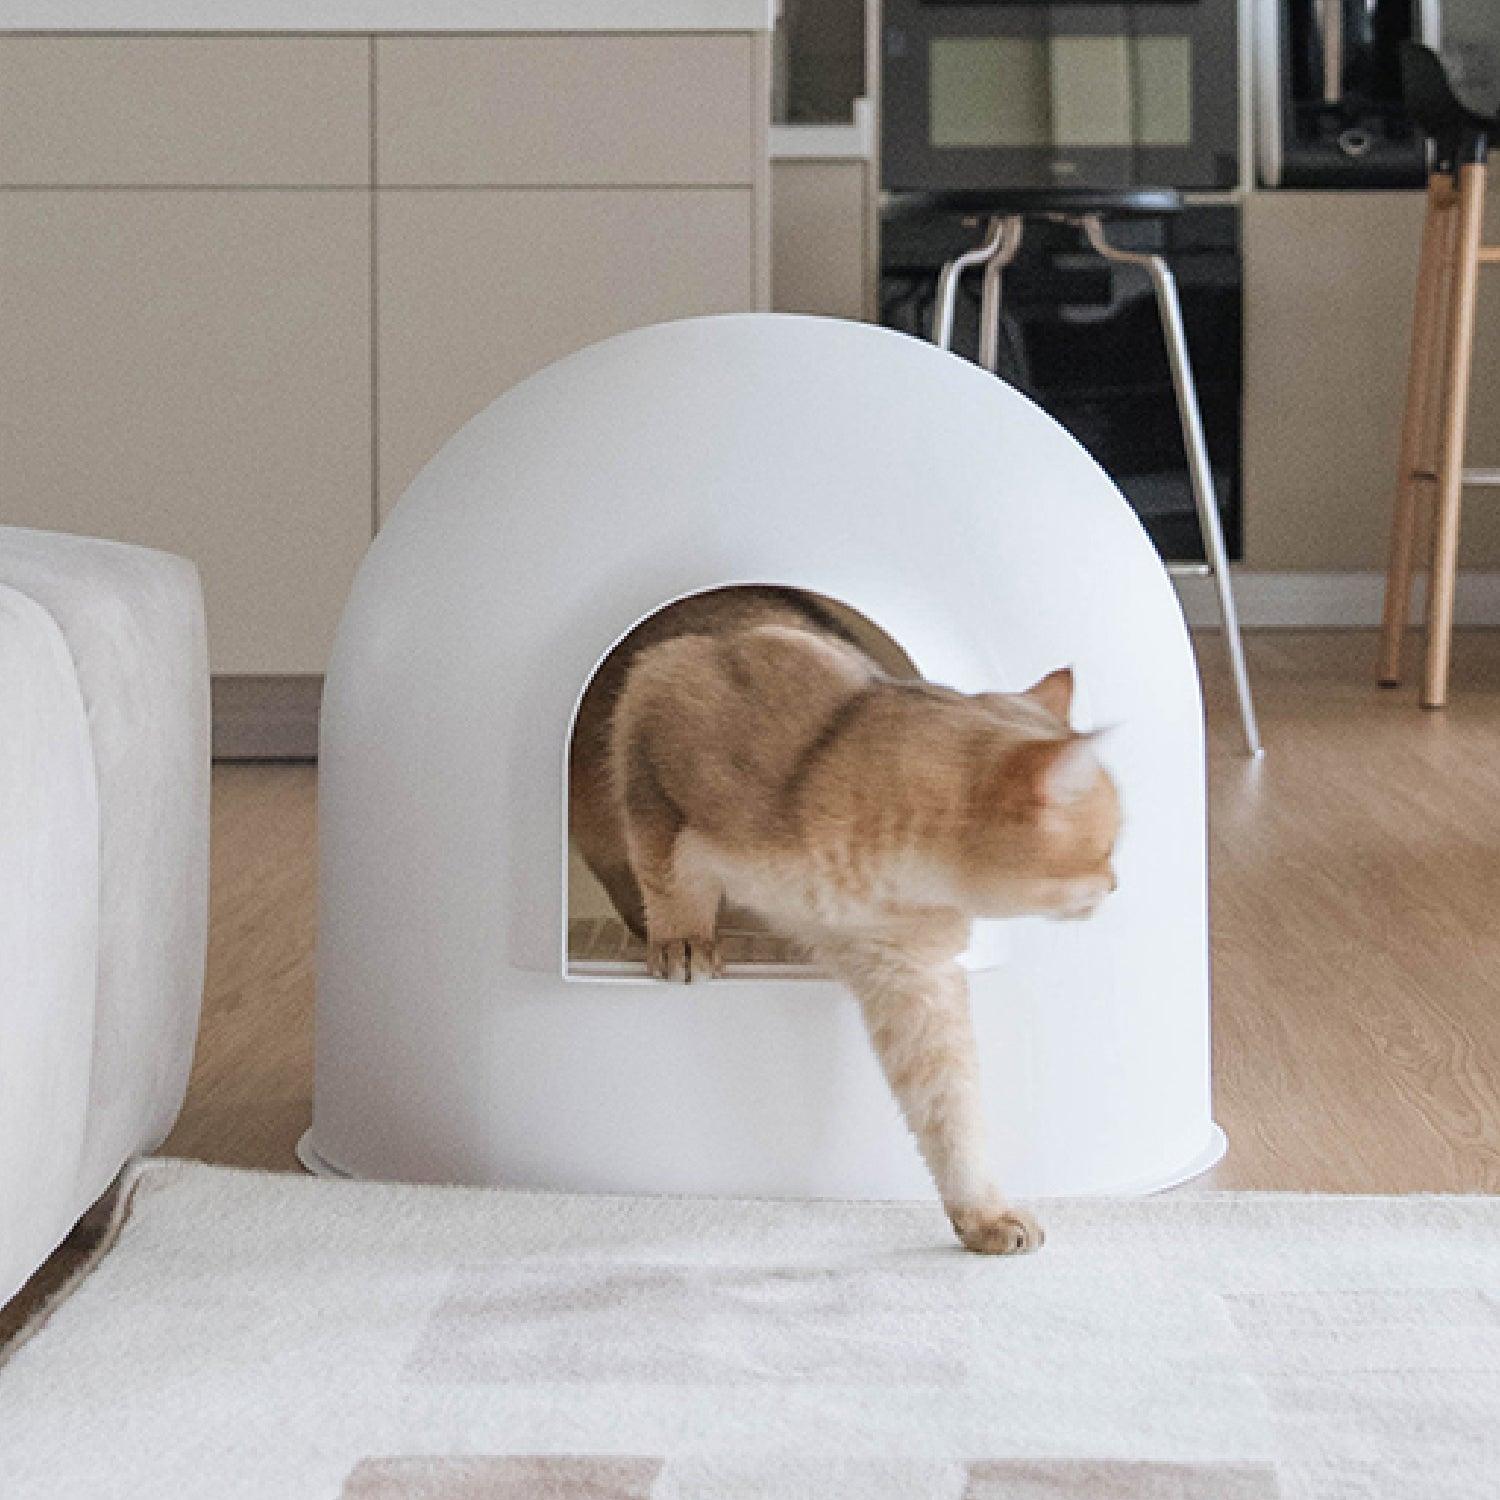 PIDAN Igloo Cat Litter Box with Litter Scoop - Award-Winning Design for a Clean and Comfortable Cat Haven - PAWS CLUB